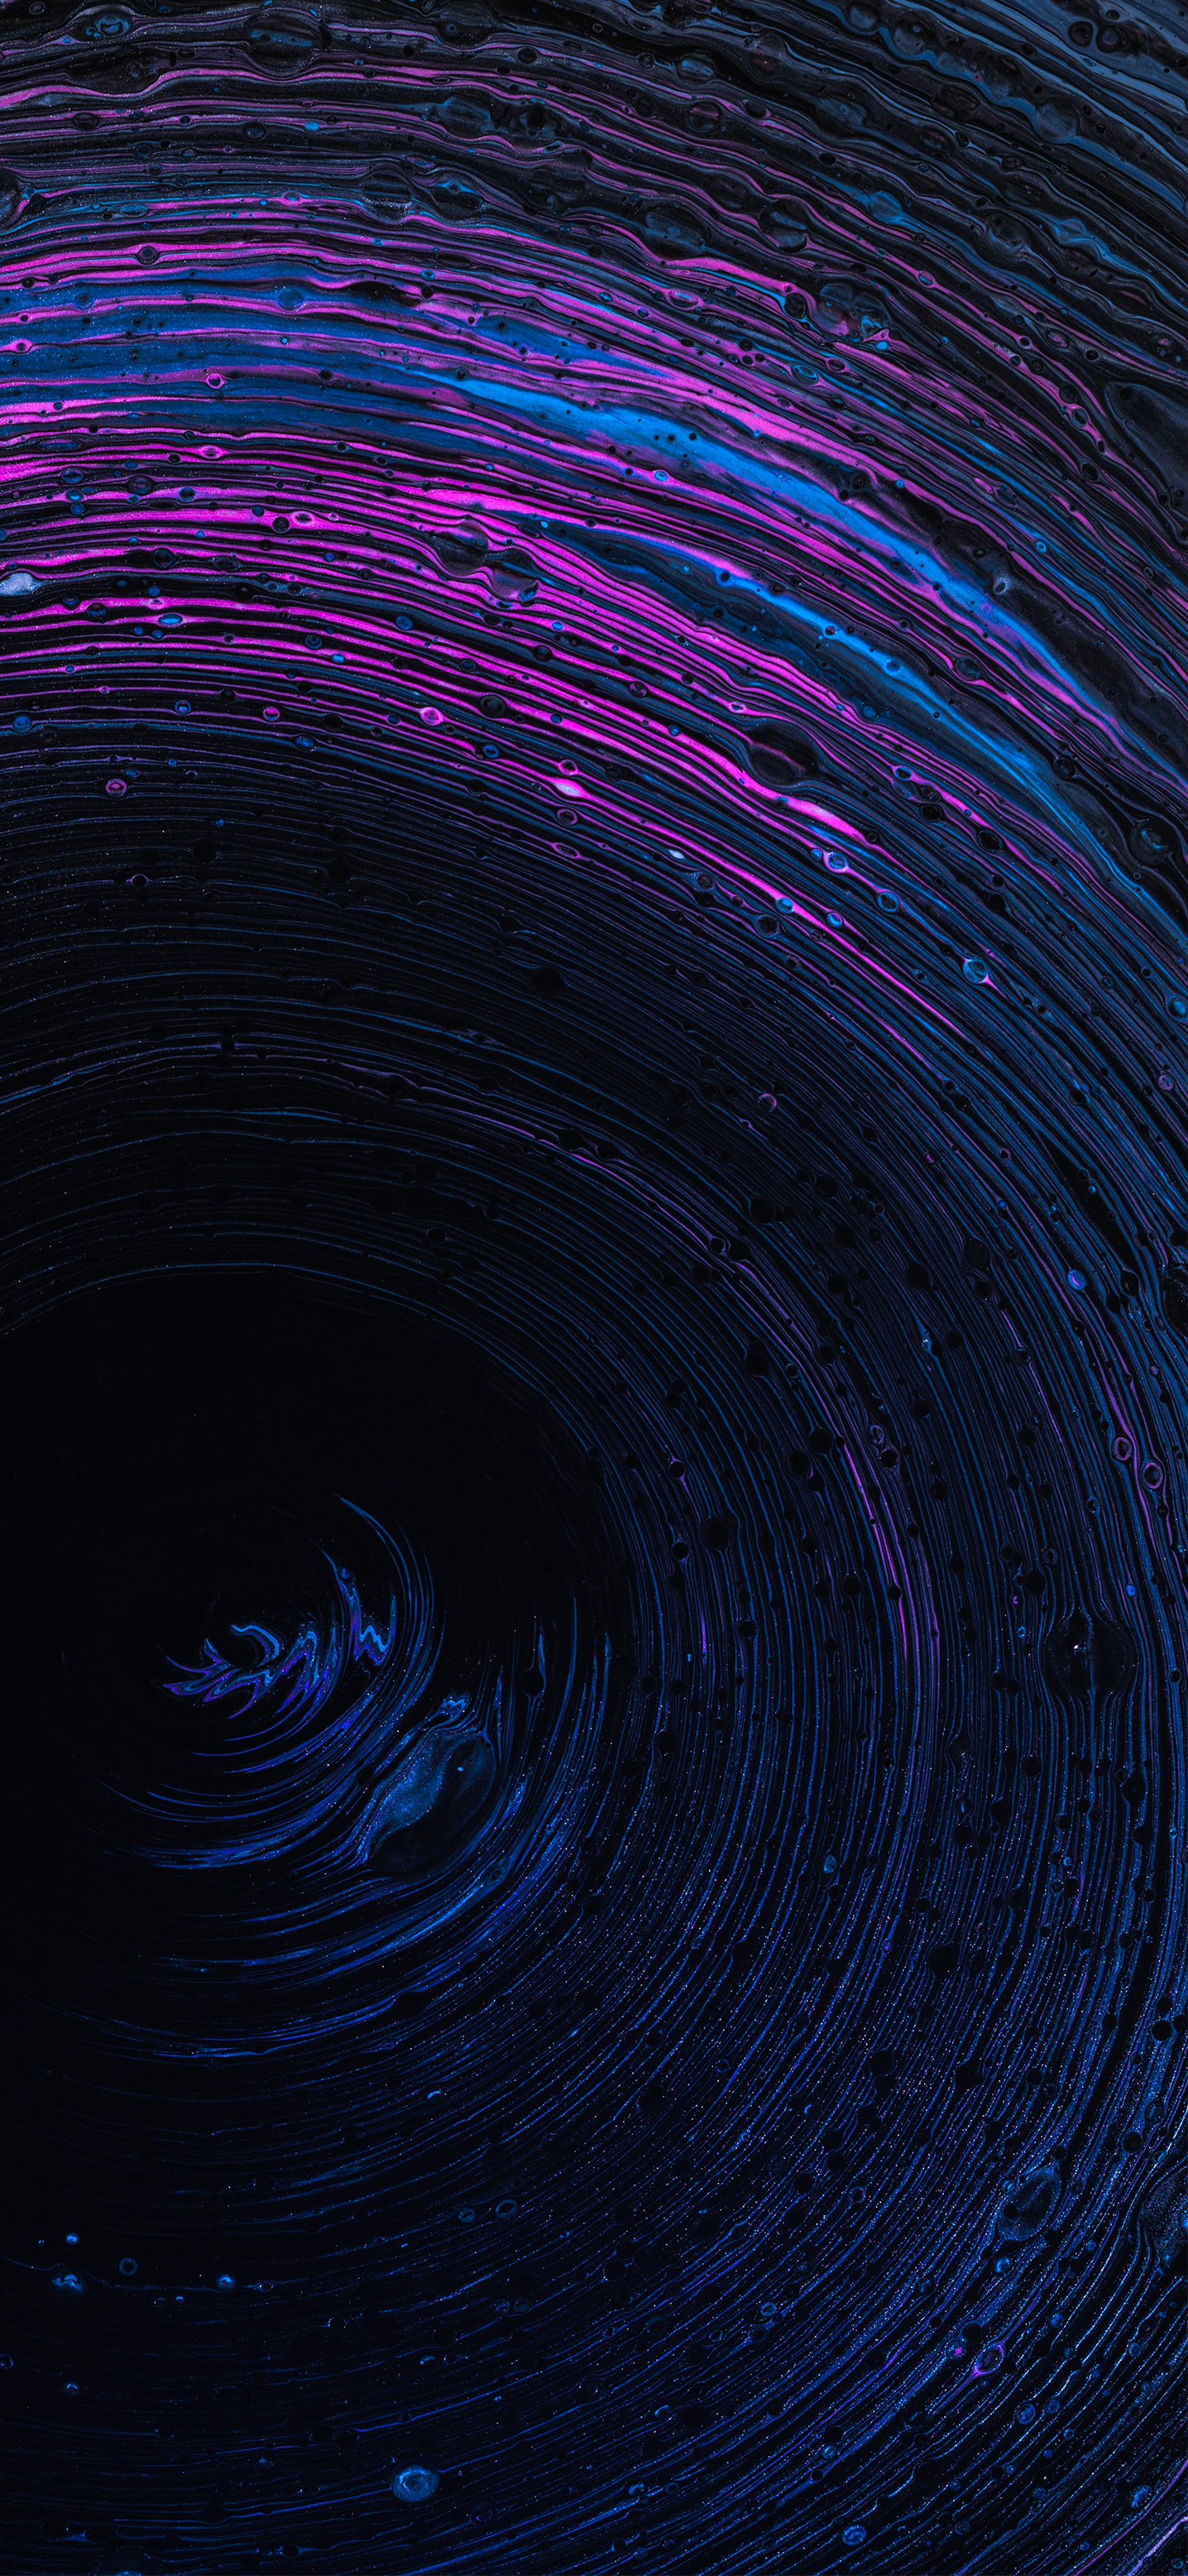 Sci Fi Black Hole Phone Wallpaper  Mobile Abyss